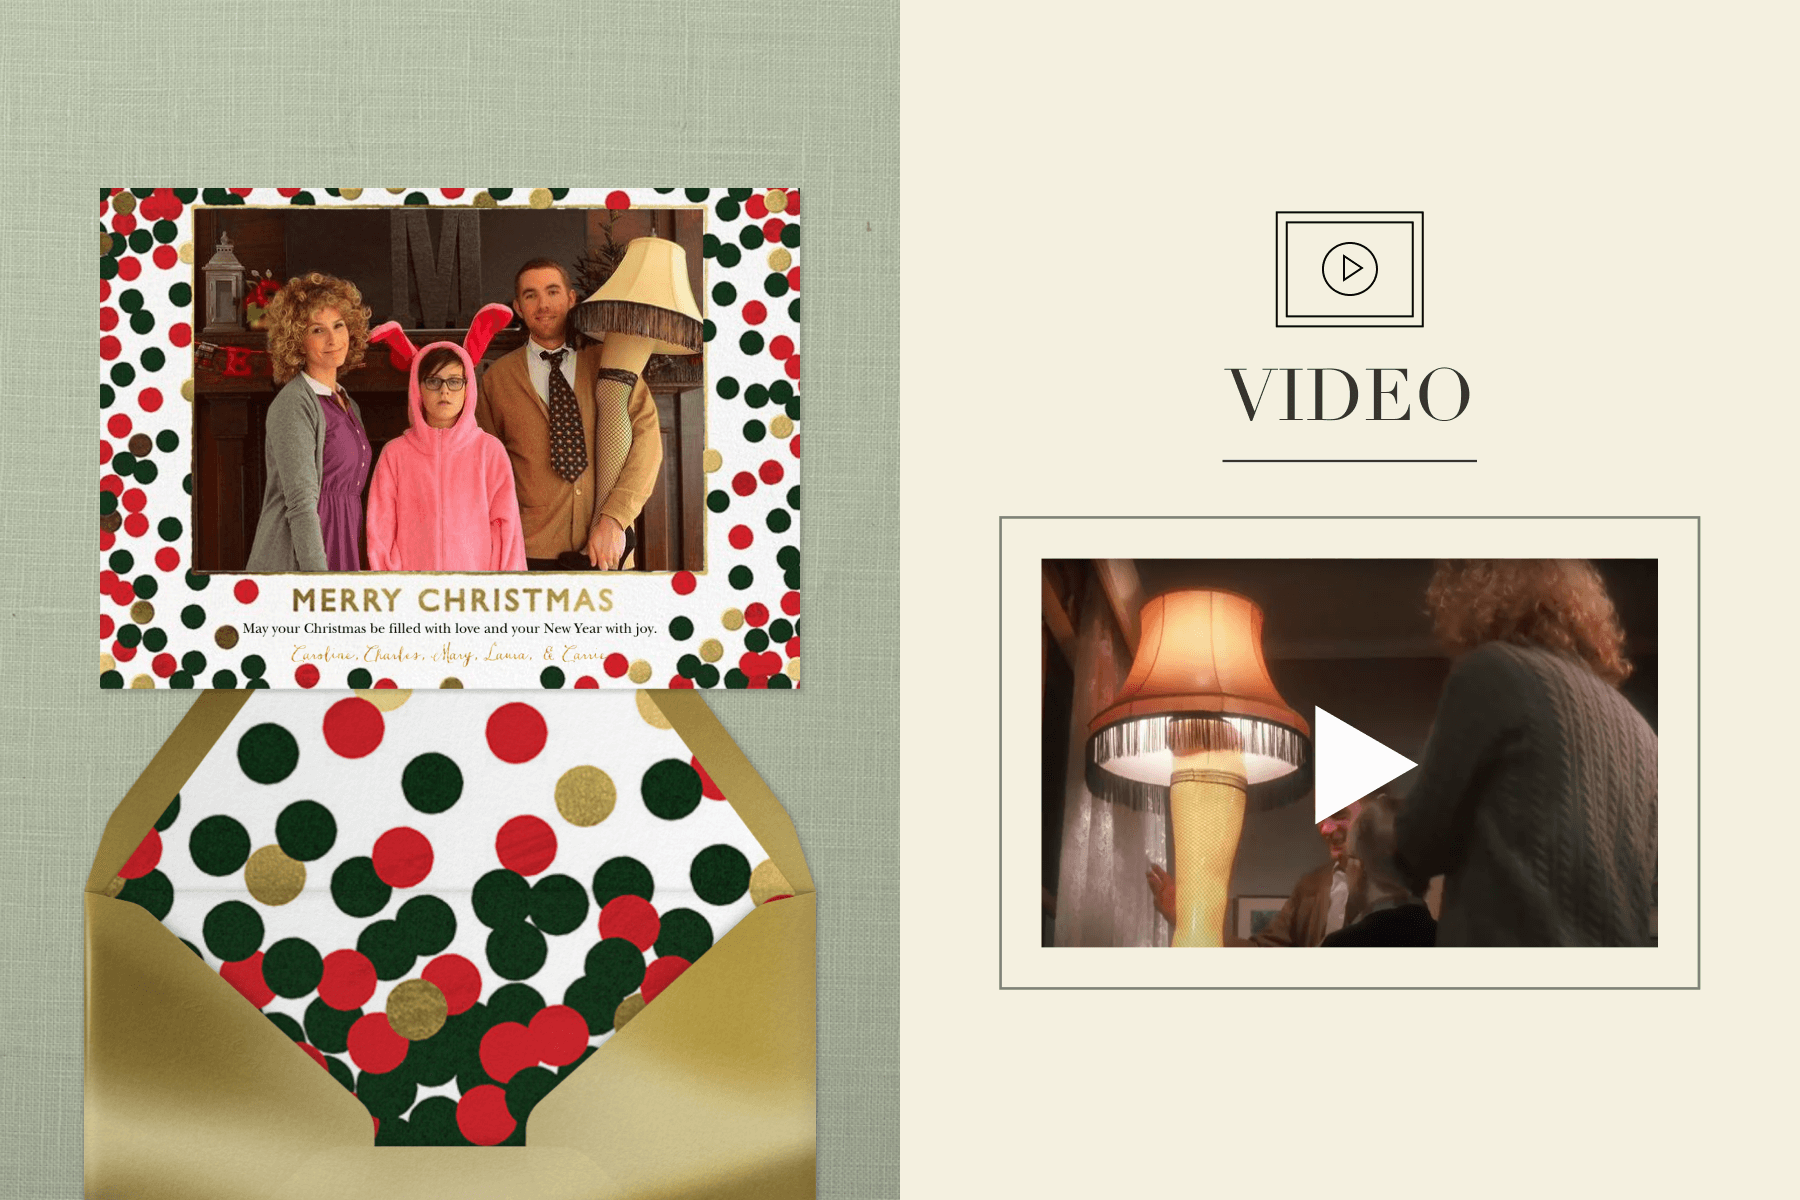 Left: A horizontal holiday photo card with red, green, and gold dots around a photo of a family dressed as “A Christmas Story” characters. Right: A Video Block where YouTube links can be added to cards.